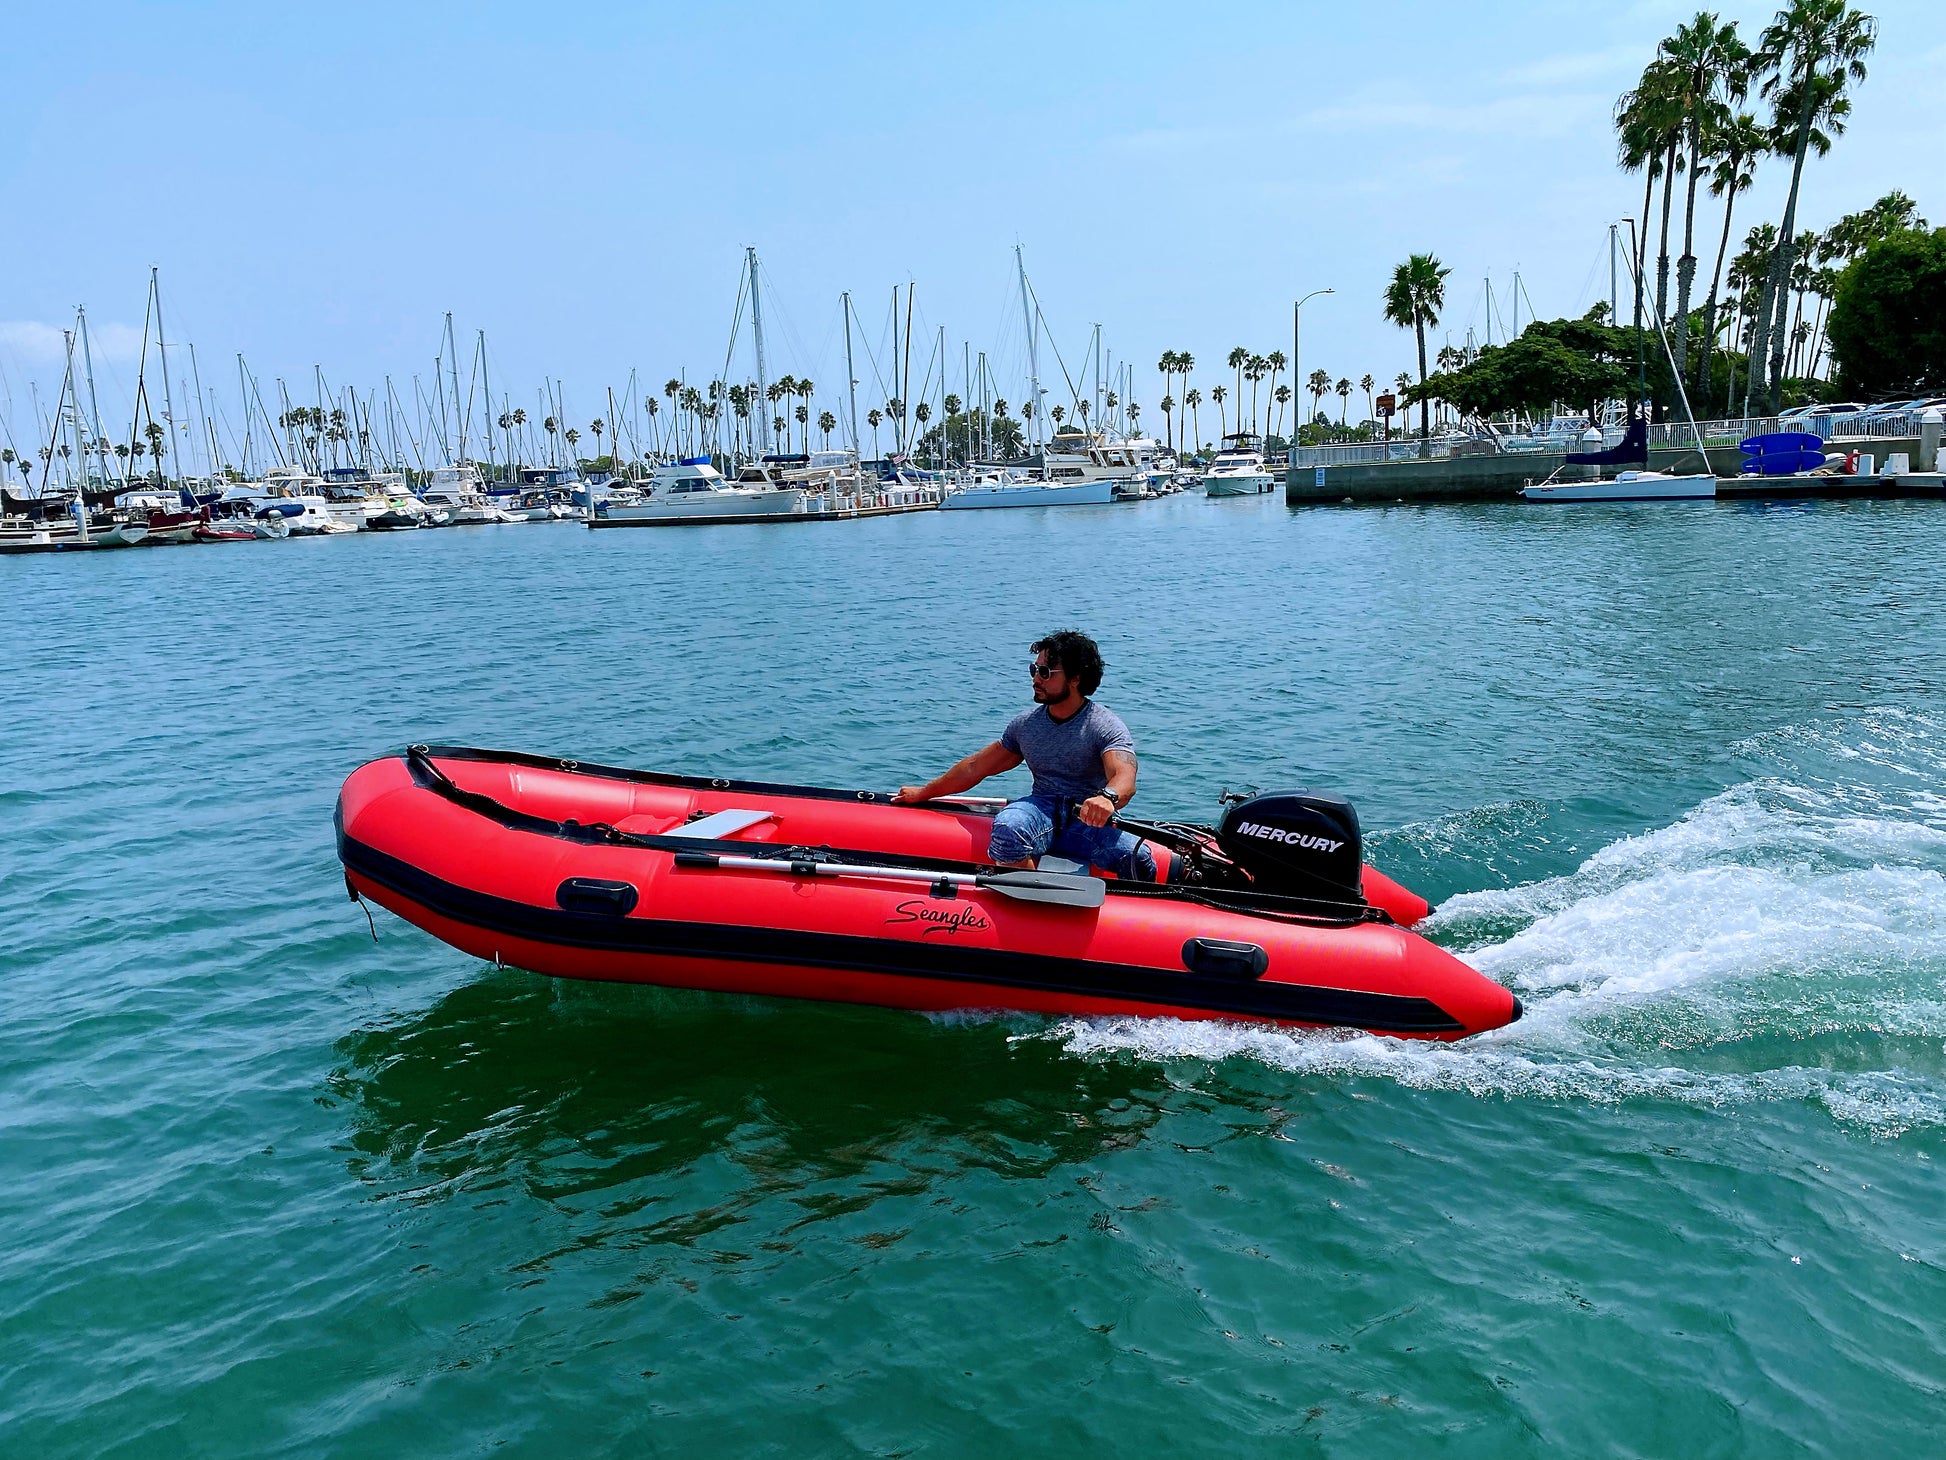 Seangles Inflatable Dinghy Boat with Aluminum Floor and Aluminum Trans